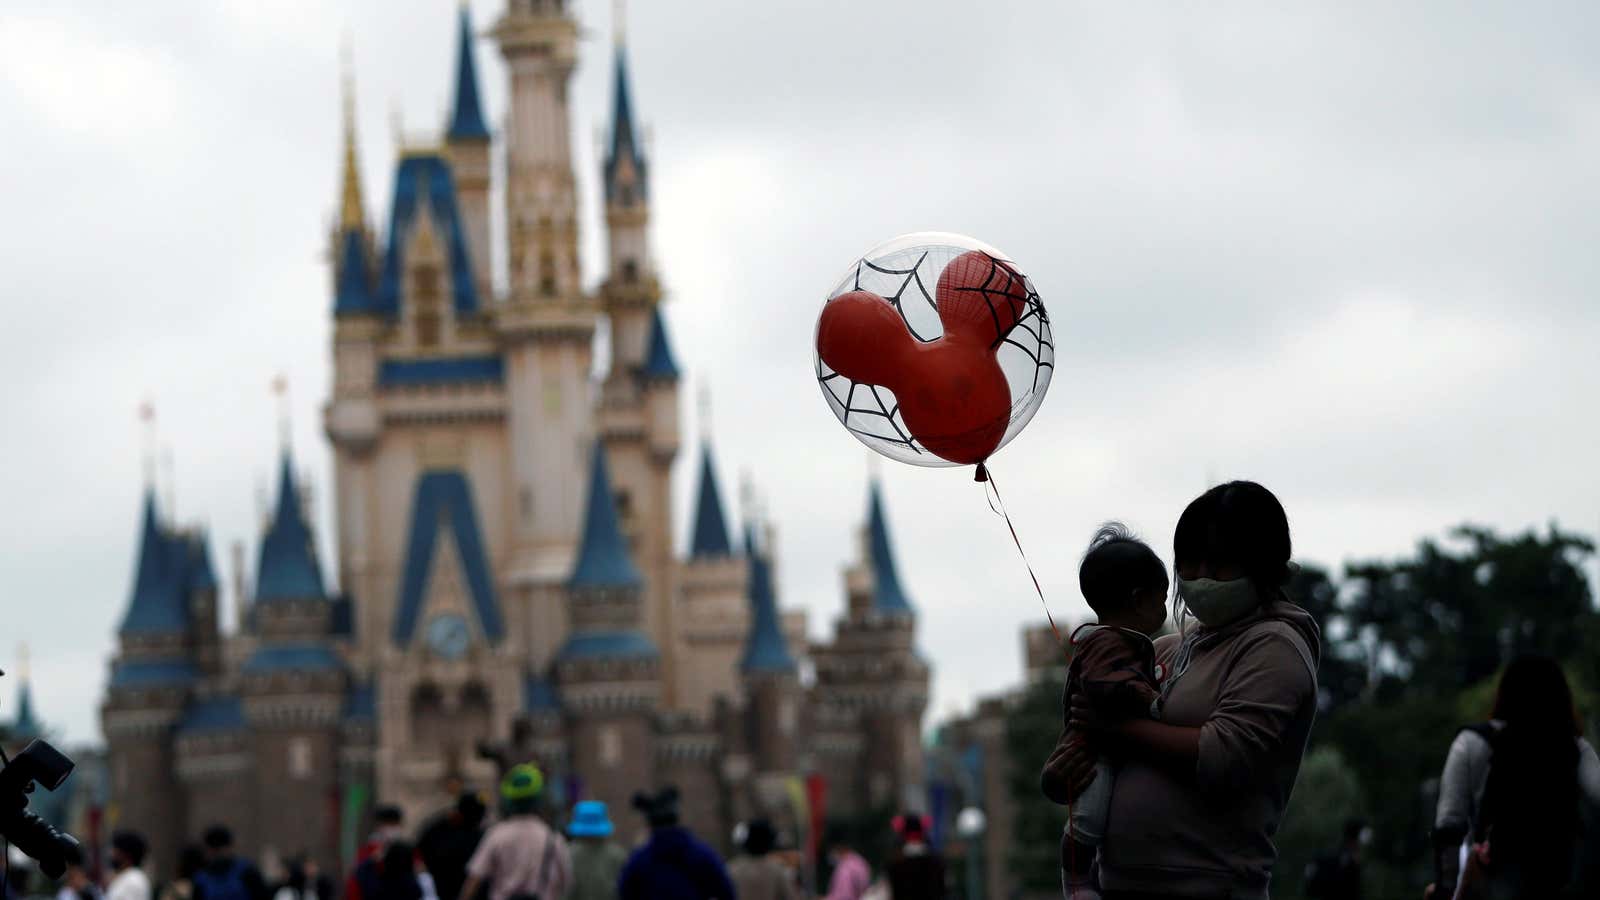 Things are bleak in the Magic Kingdom.